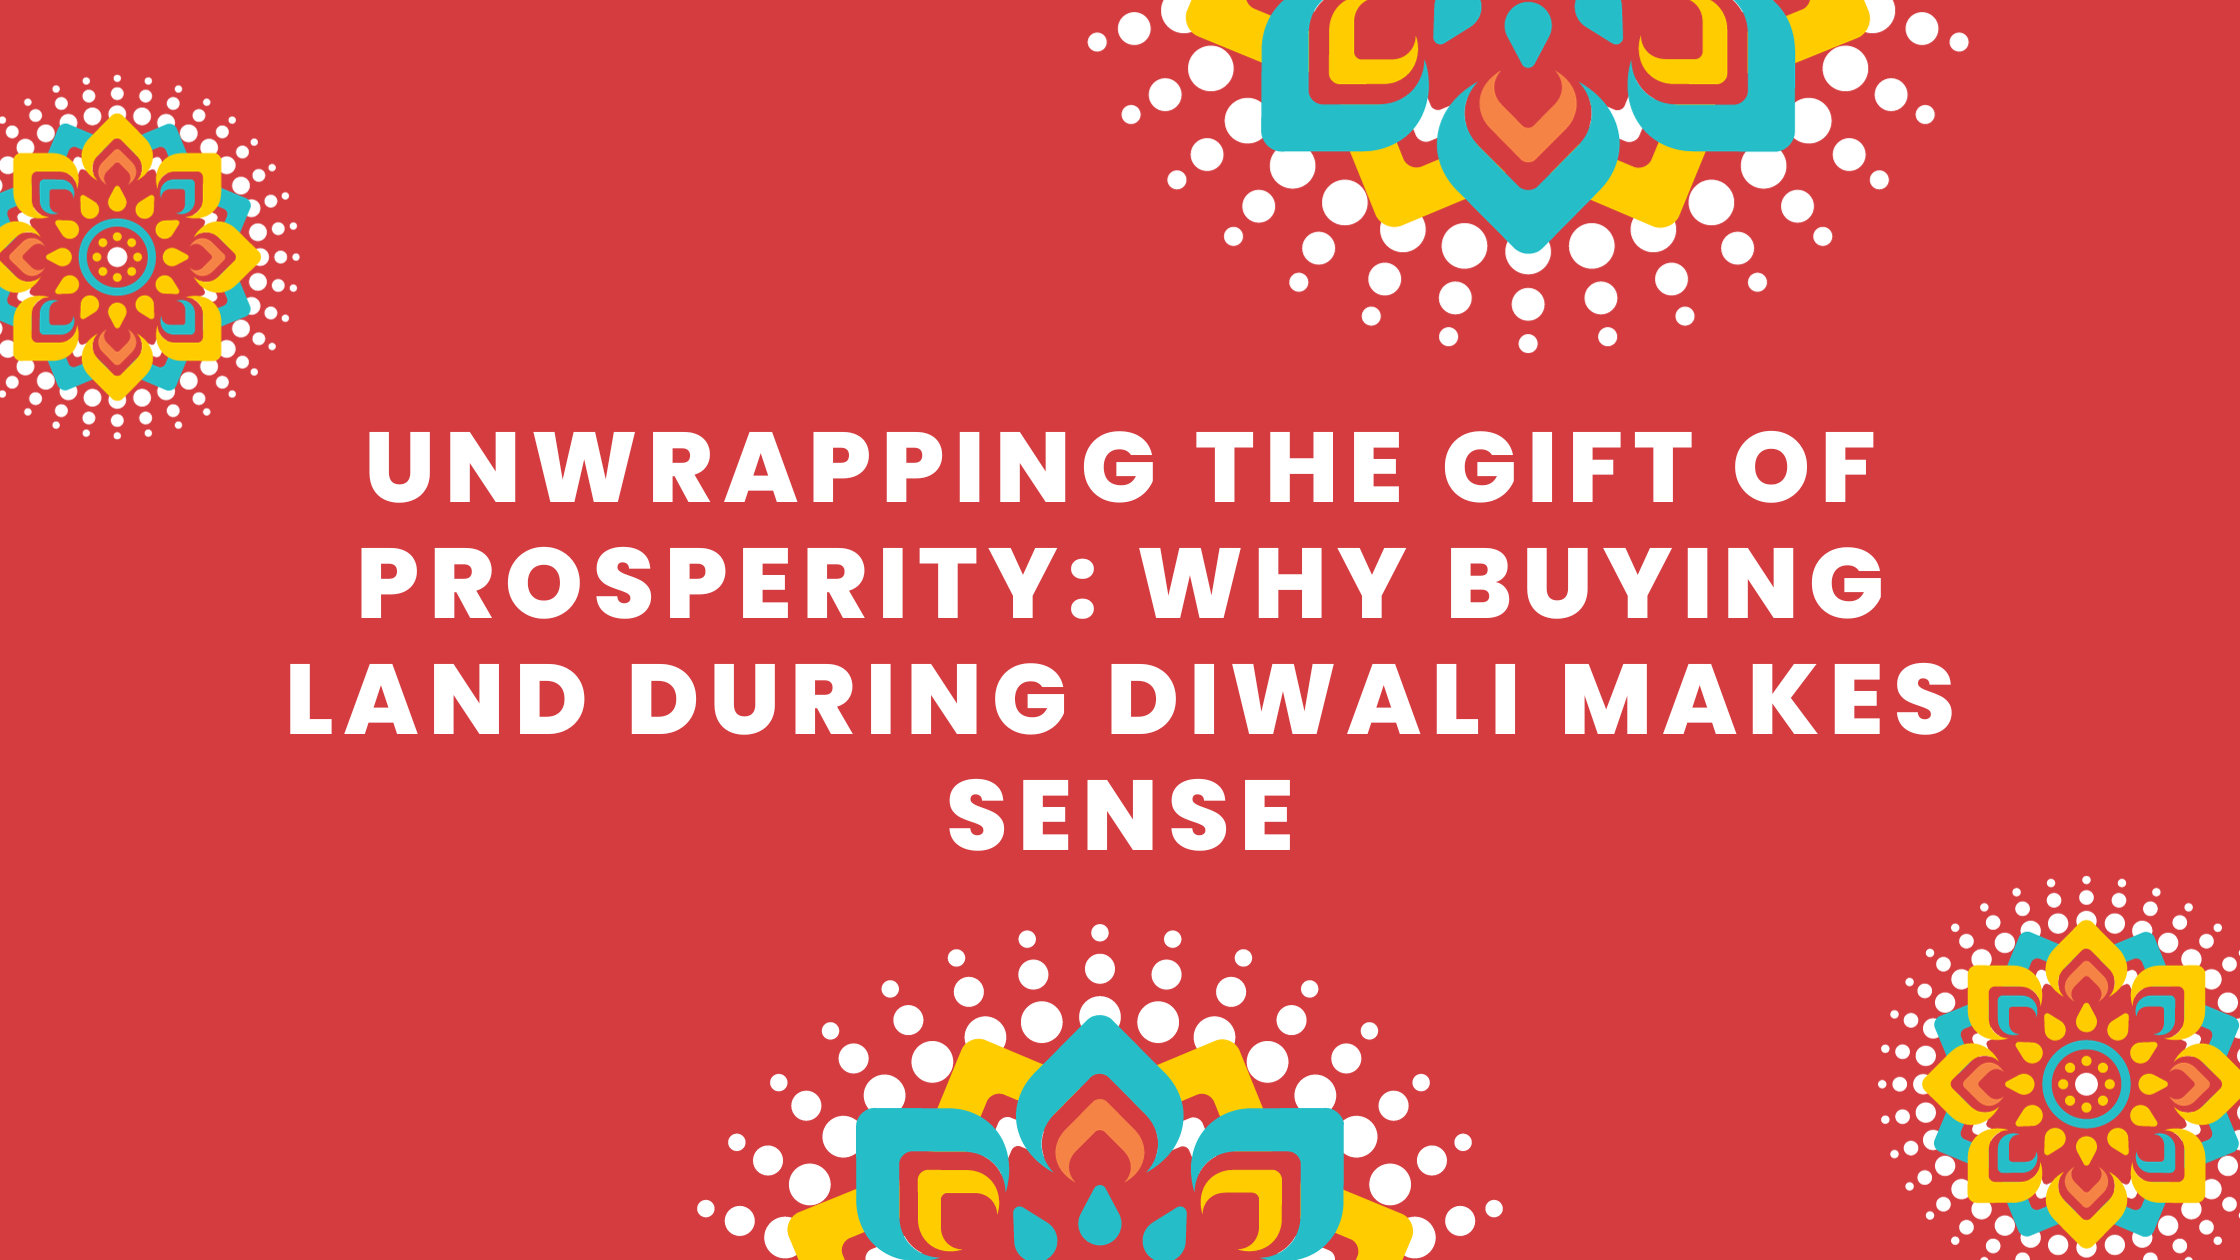 Unwrapping the Gift of Prosperity: Why Buying Land During Diwali Makes Sense